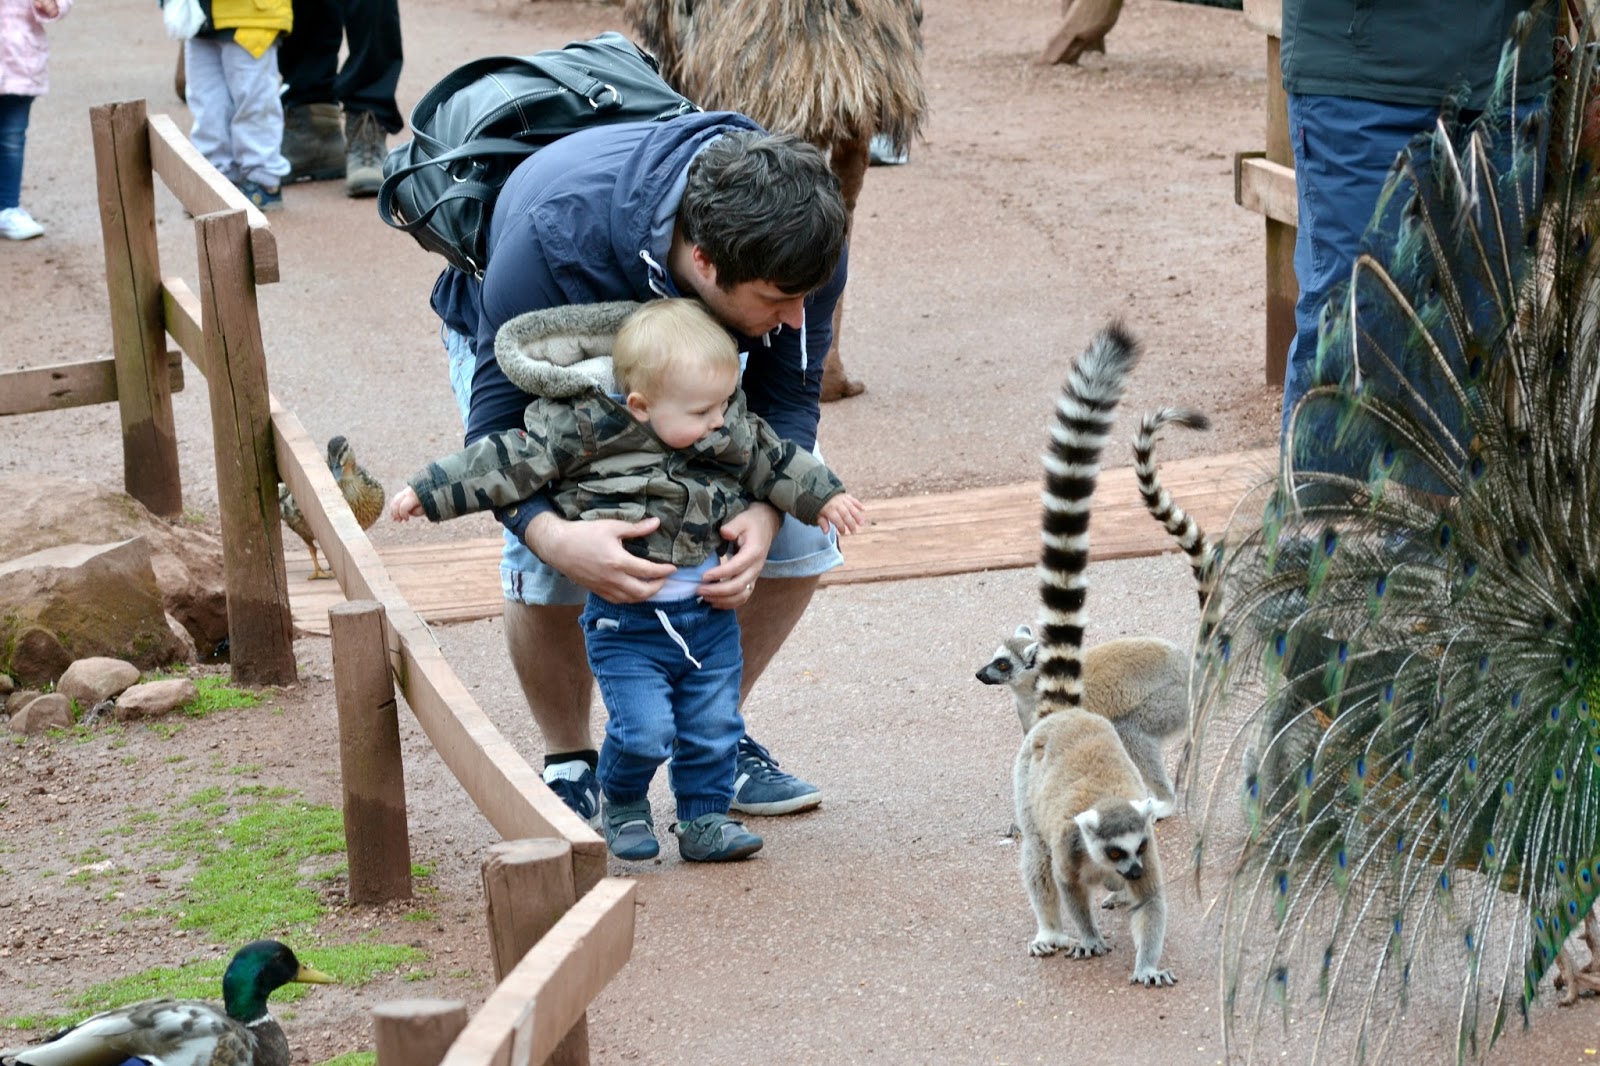 Prices for south lakes wild animal park